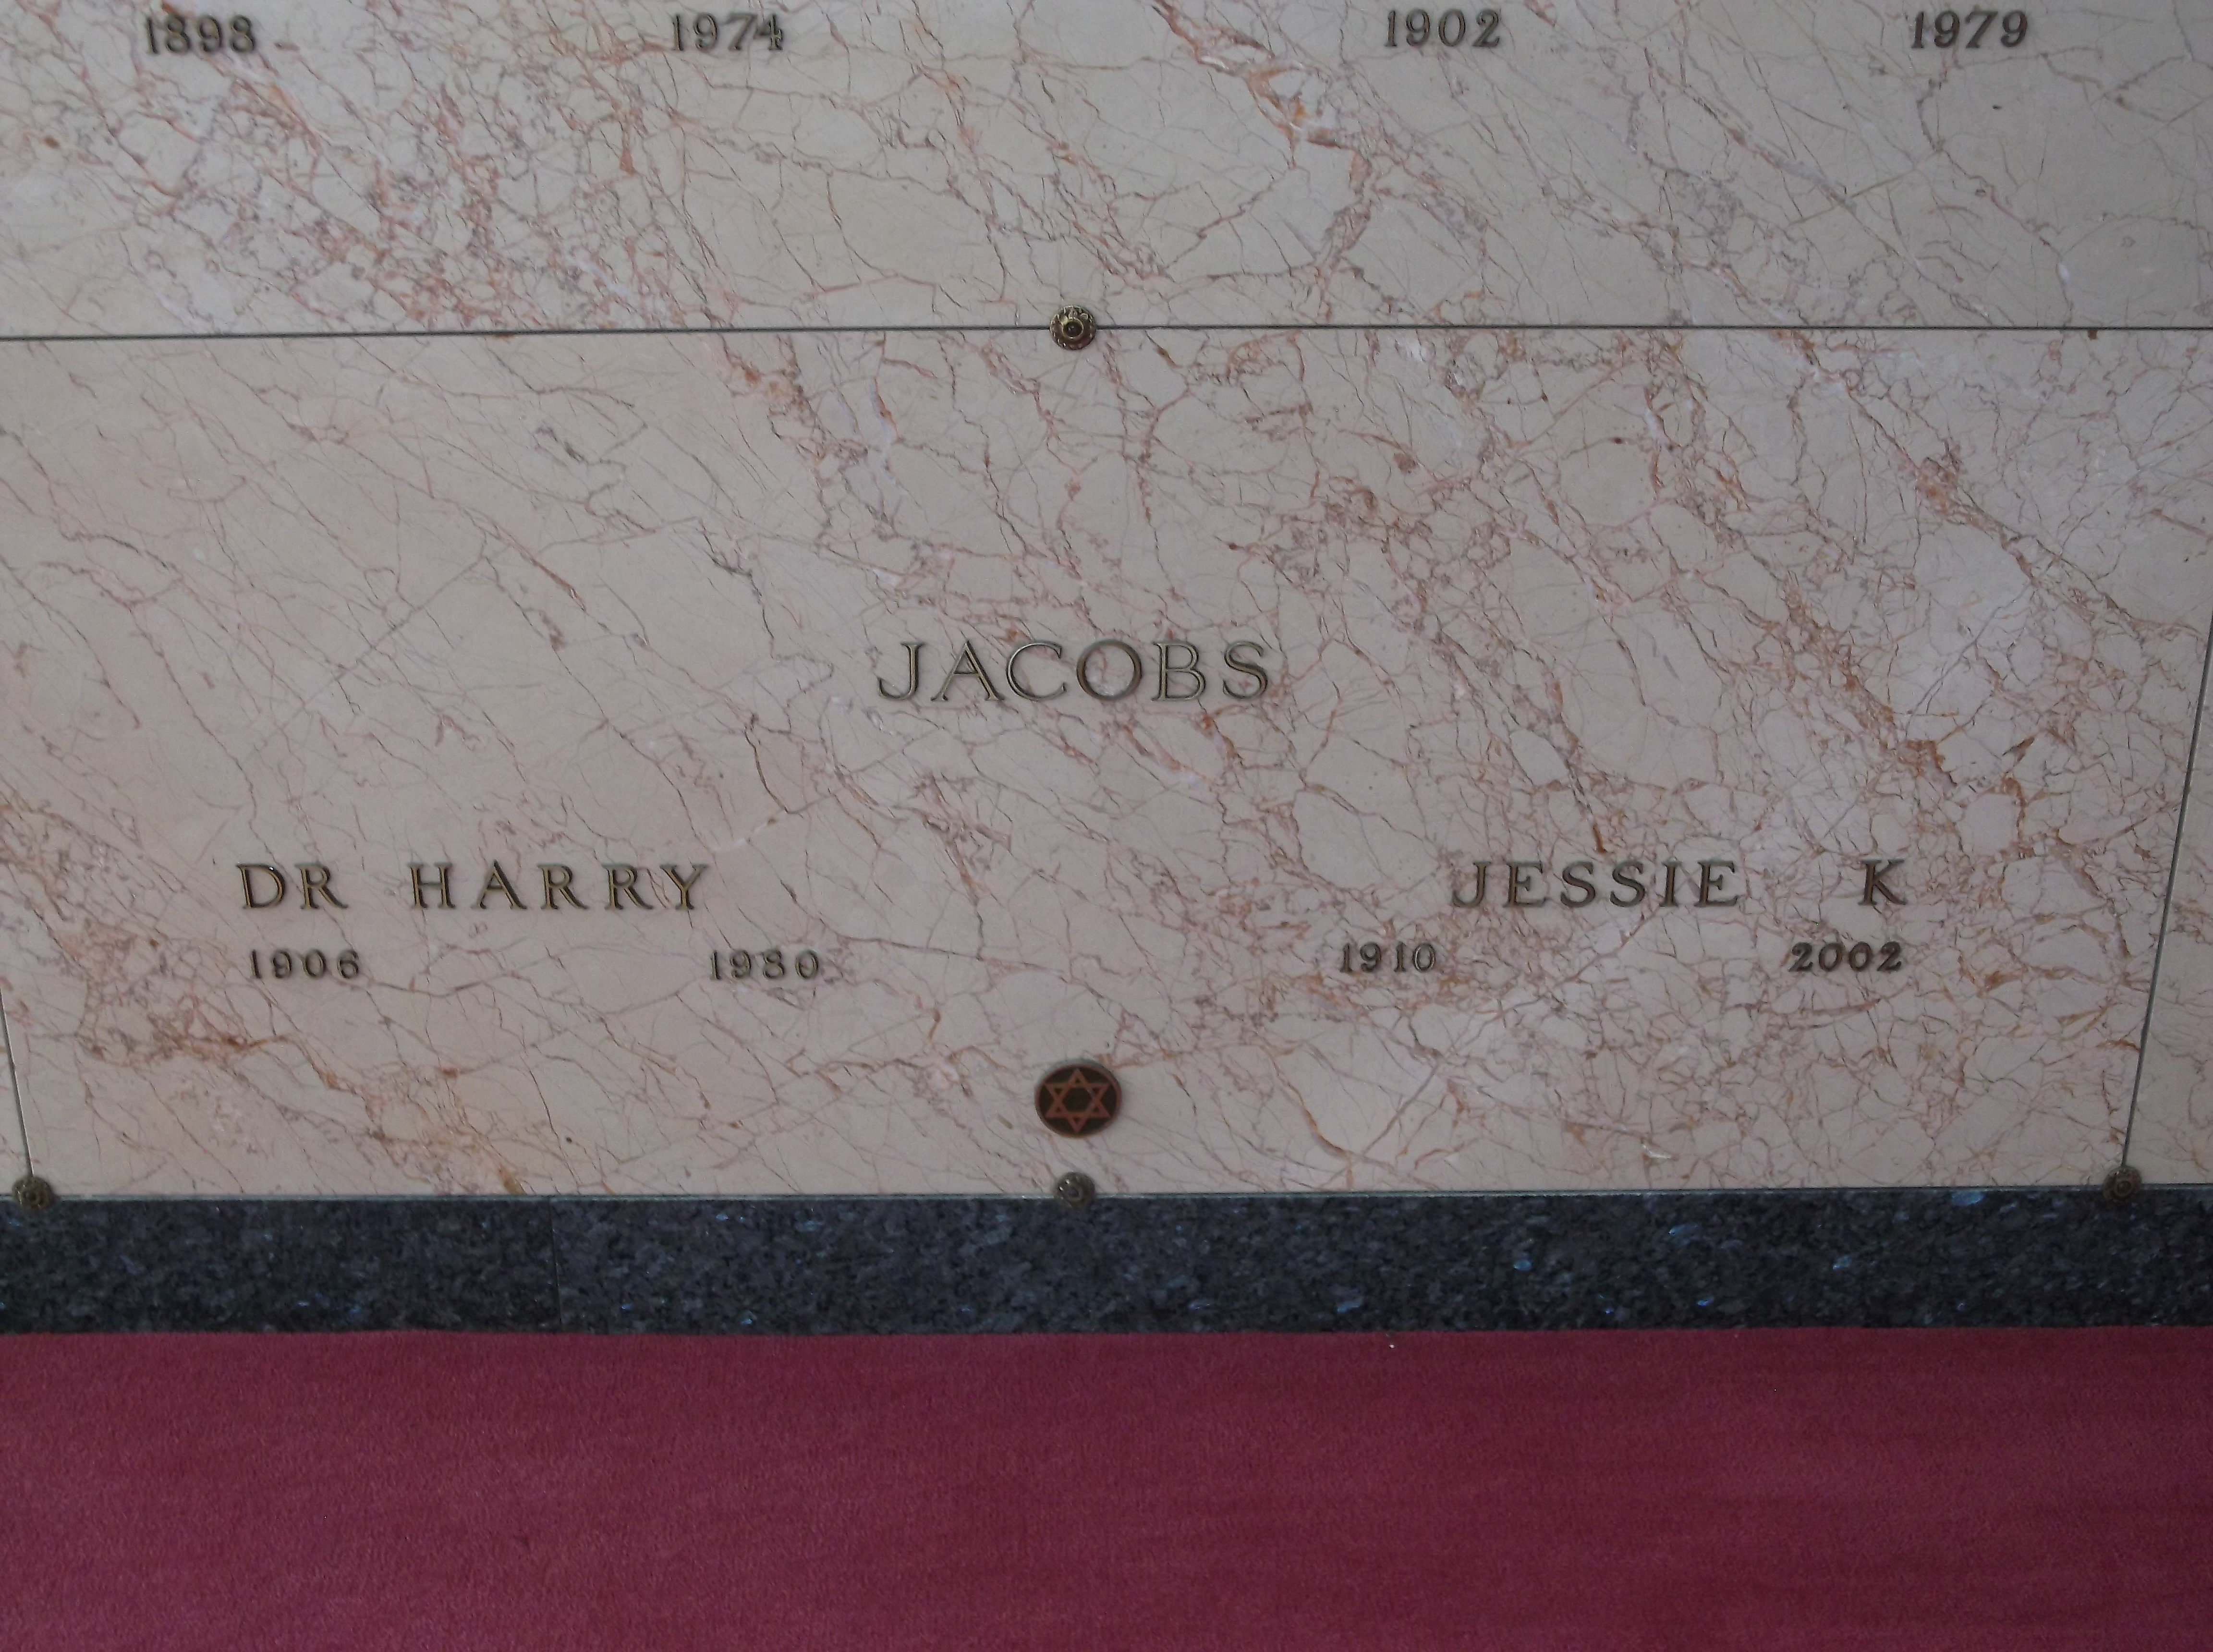 Dr Harry Jacobs